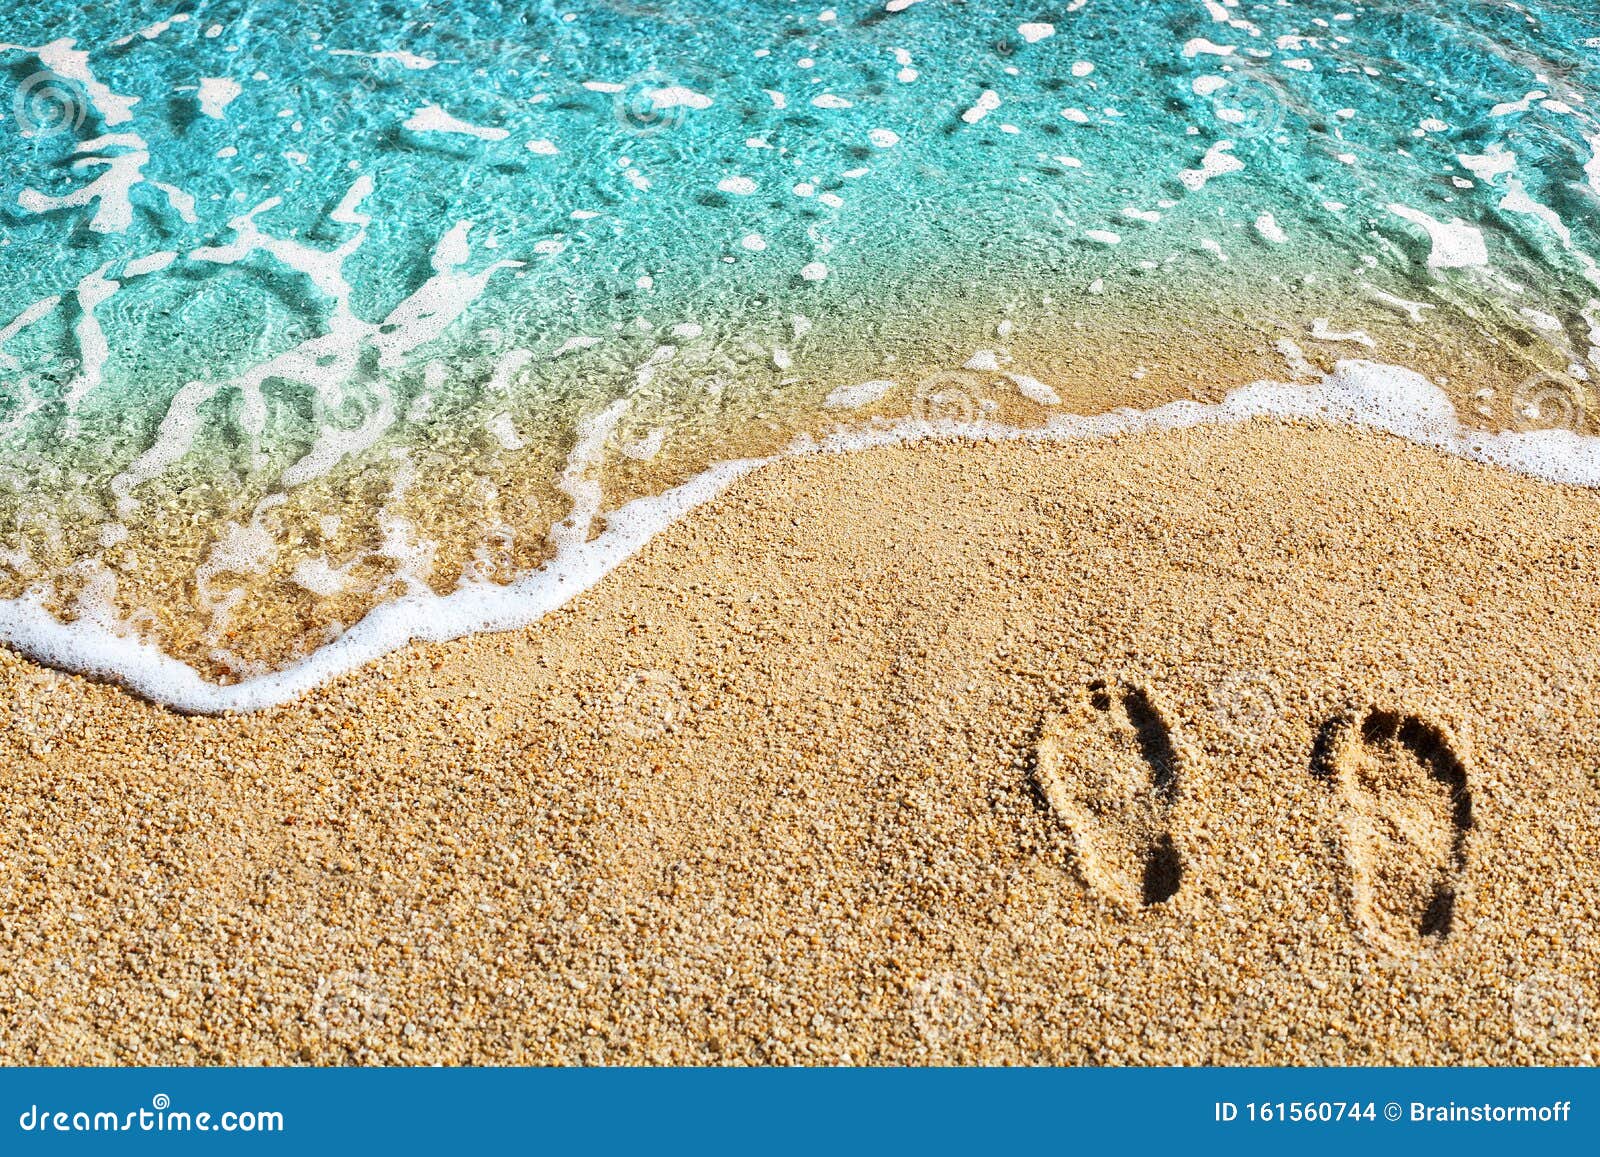 two footprints on yellow sand, blue sea wave, white foam top view close up, turquoise ocean water, summer vacations concept